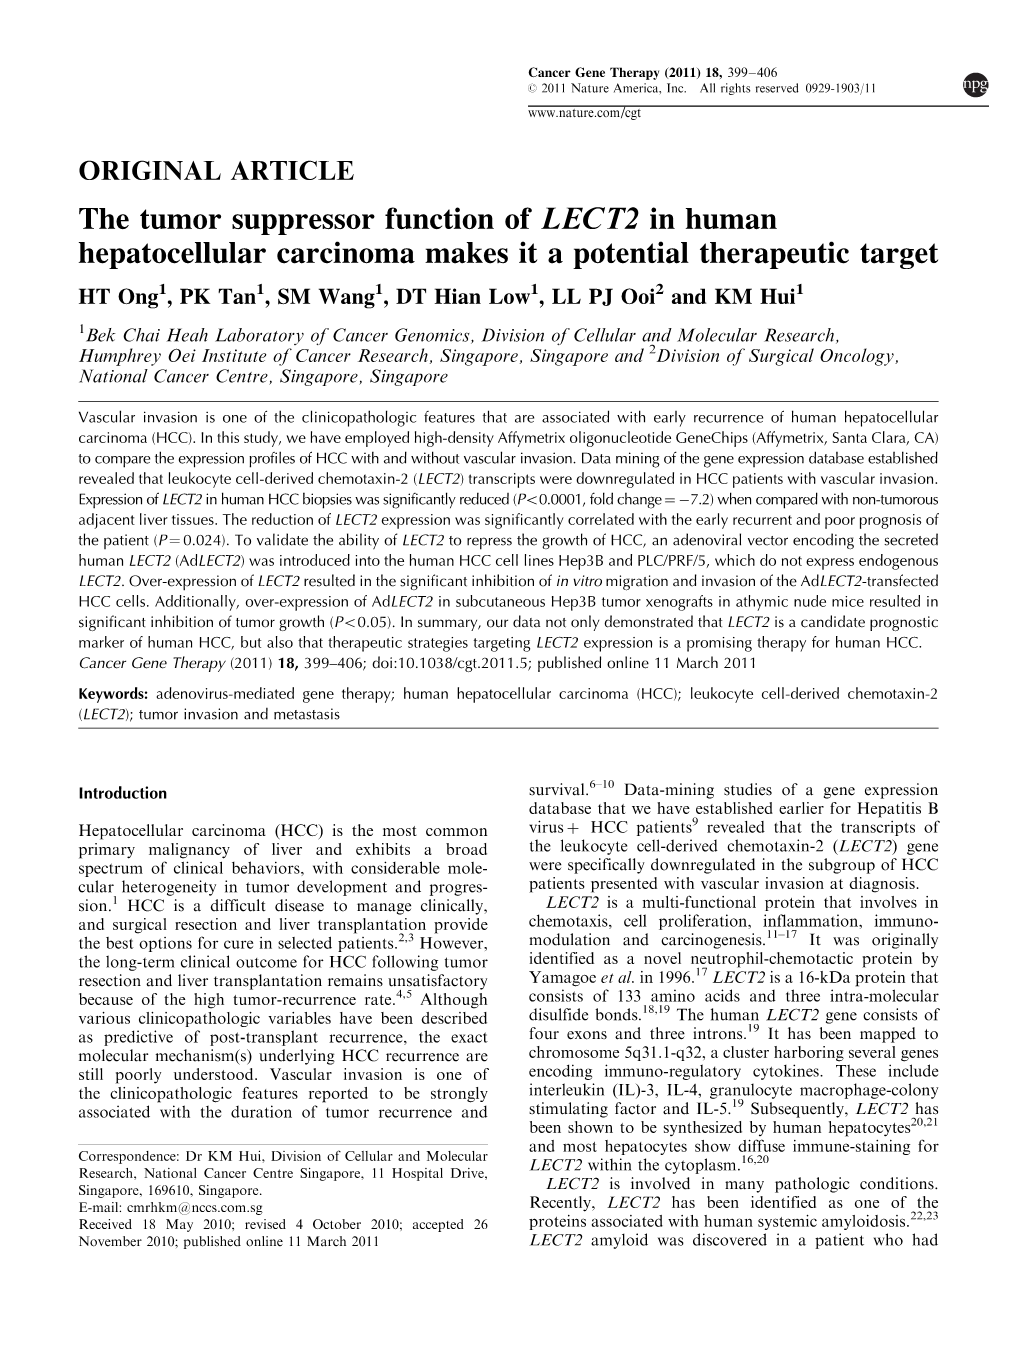 The Tumor Suppressor Function of LECT2 in Human Hepatocellular Carcinoma Makes It a Potential Therapeutic Target